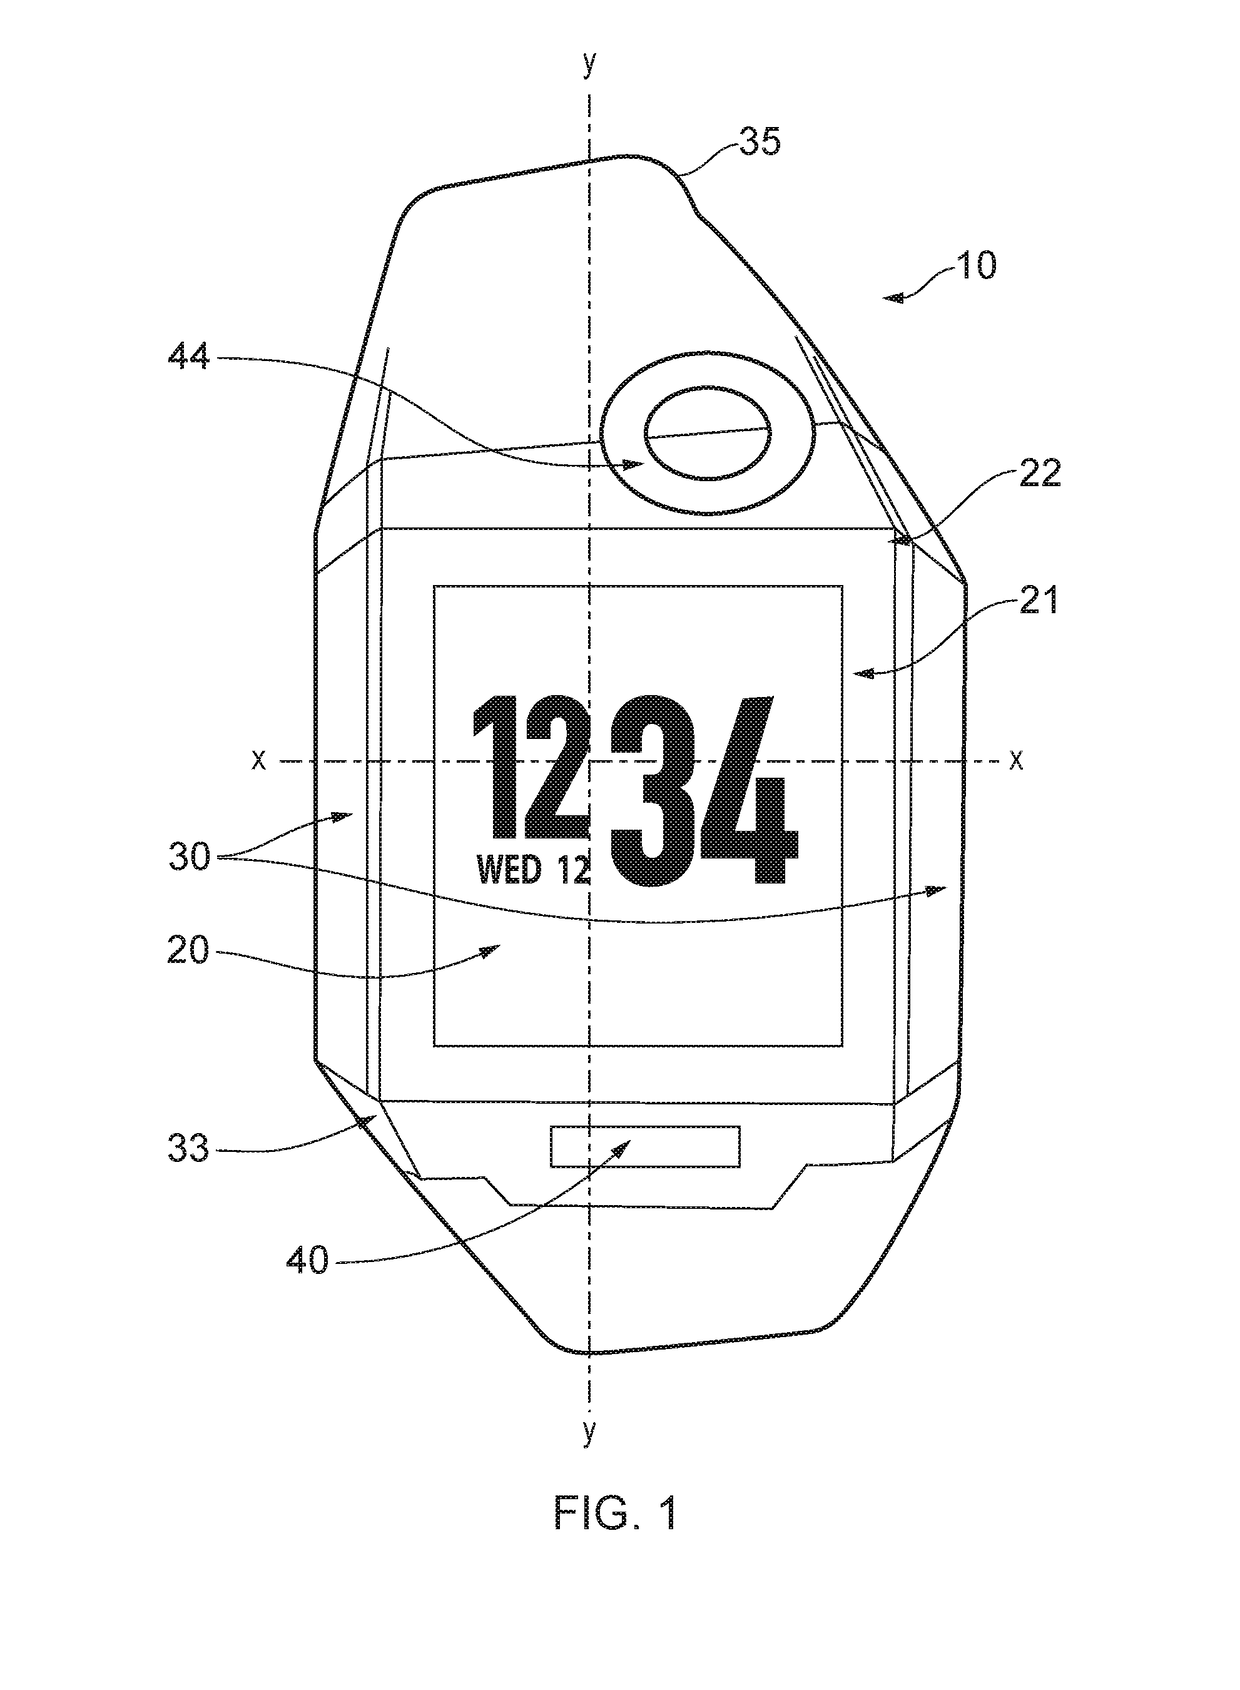 Placement of an antenna in a wrist worn device